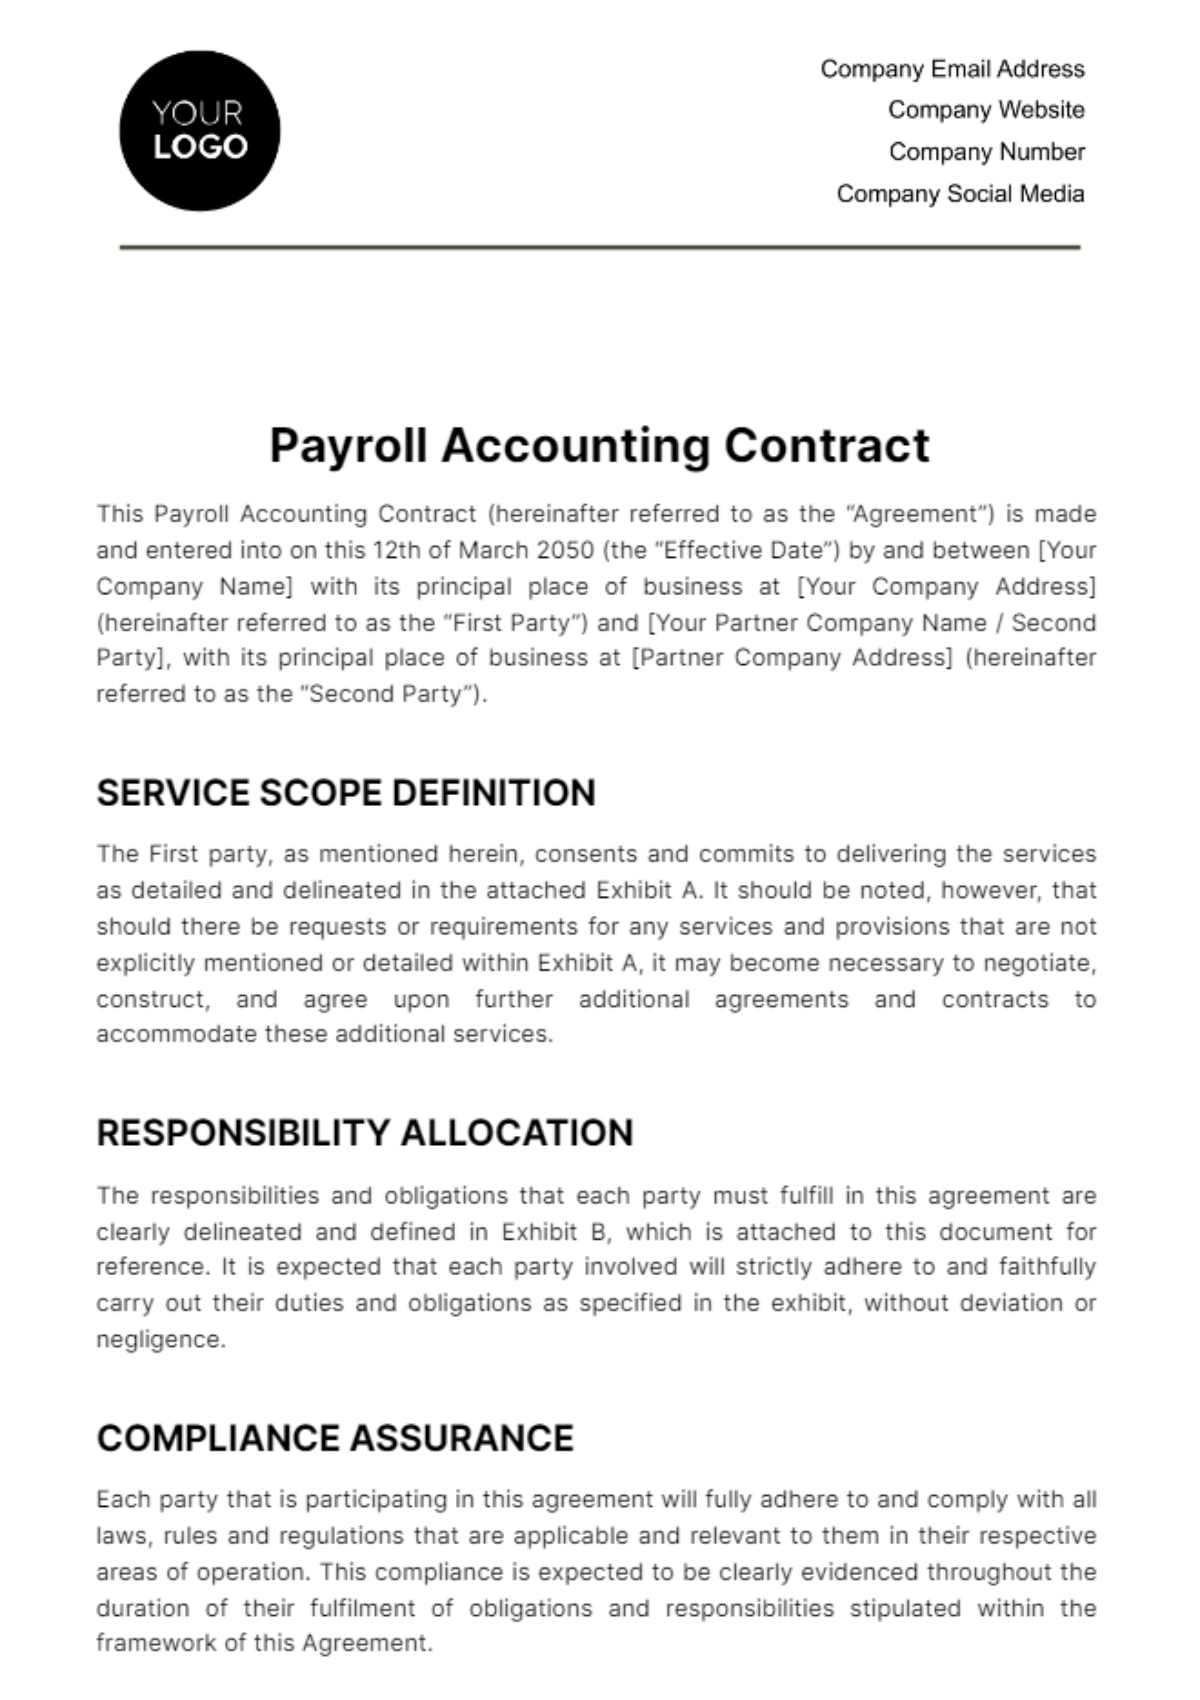 Free Payroll Accounting Contract Template